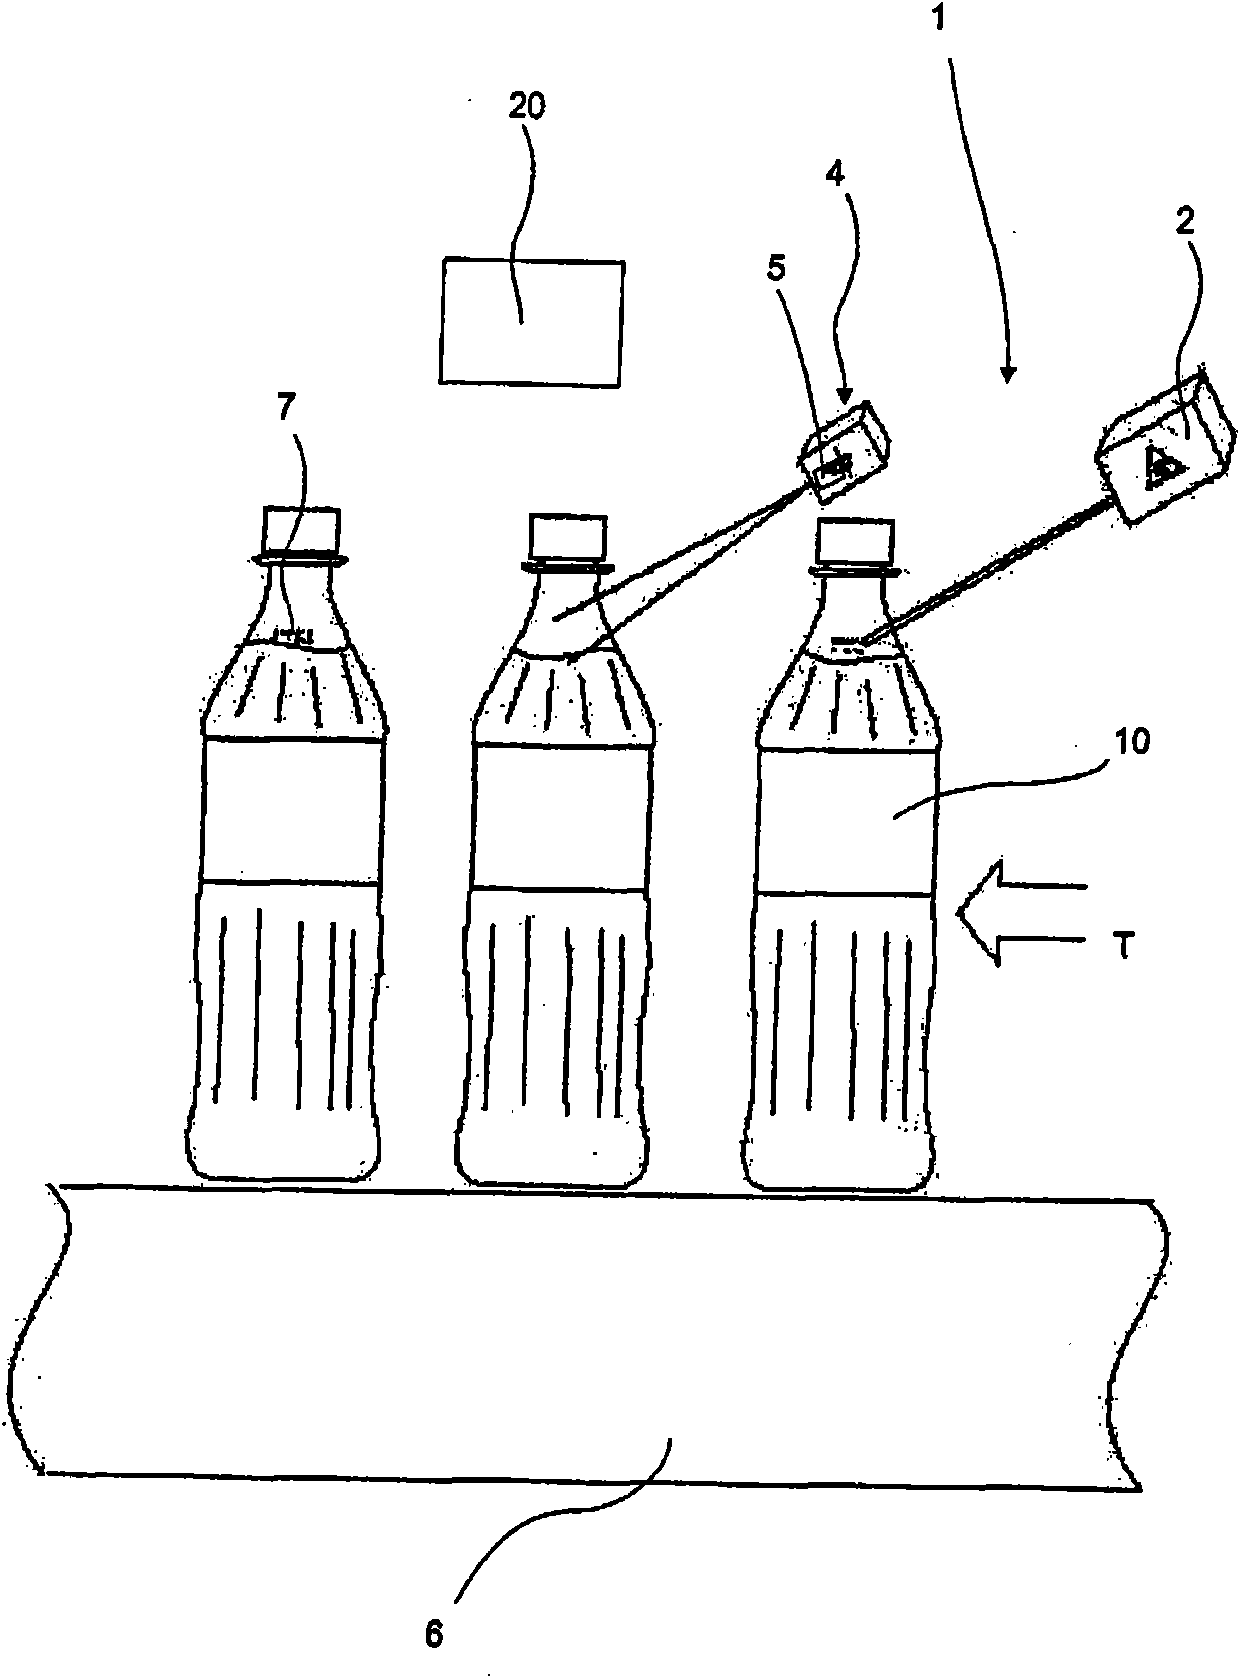 Device and method for marking plastic containers